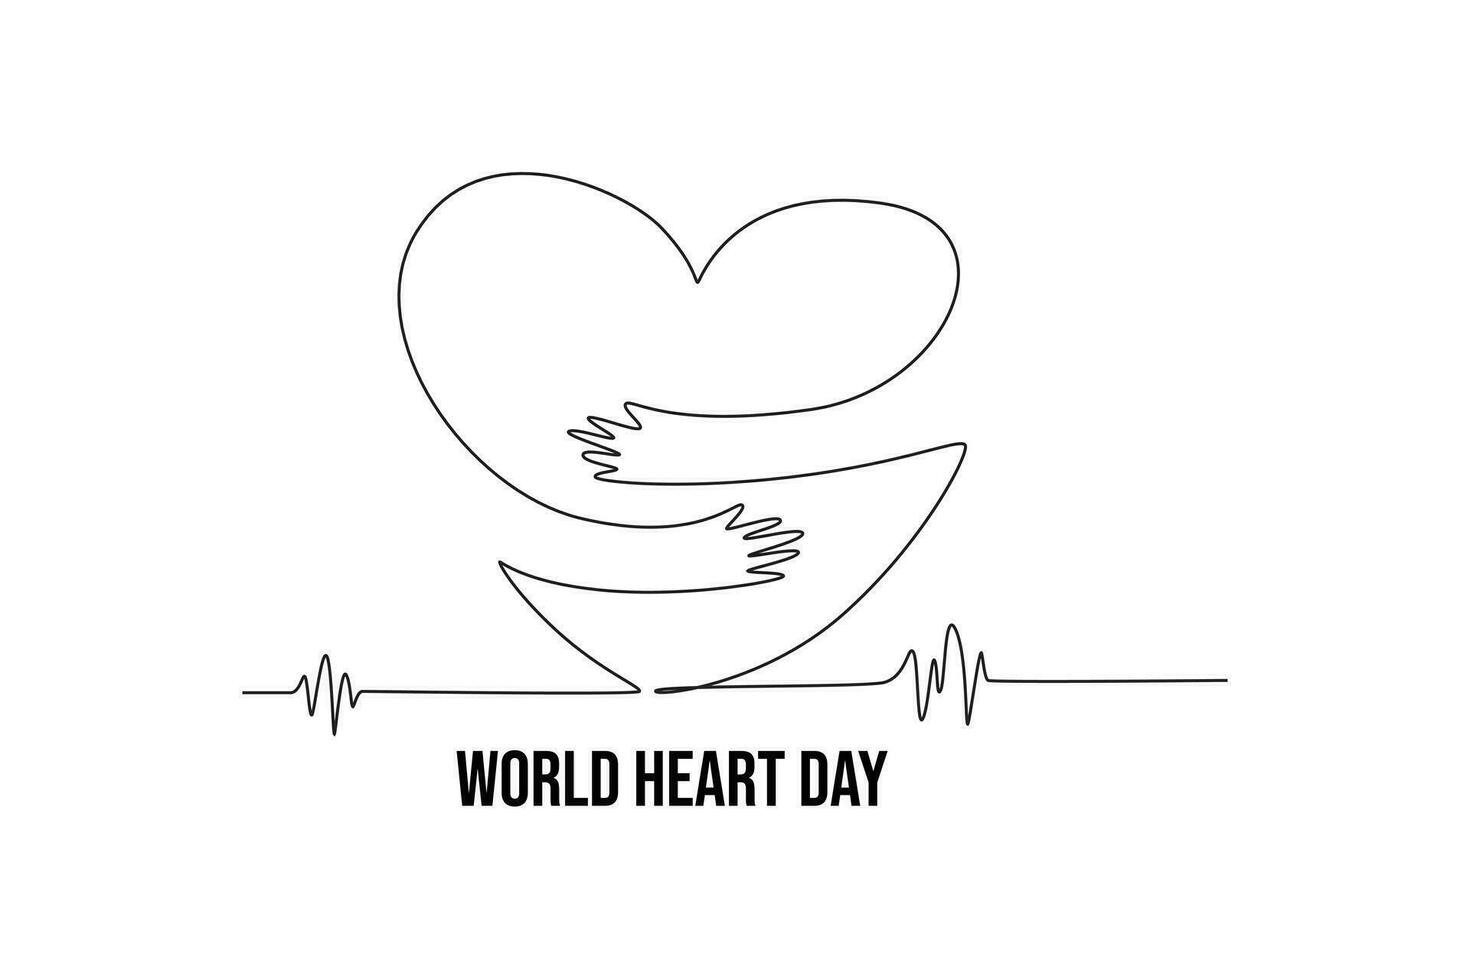 Continuous one line drawing World Heart Day concept. Single line draw design vector graphic illustration.